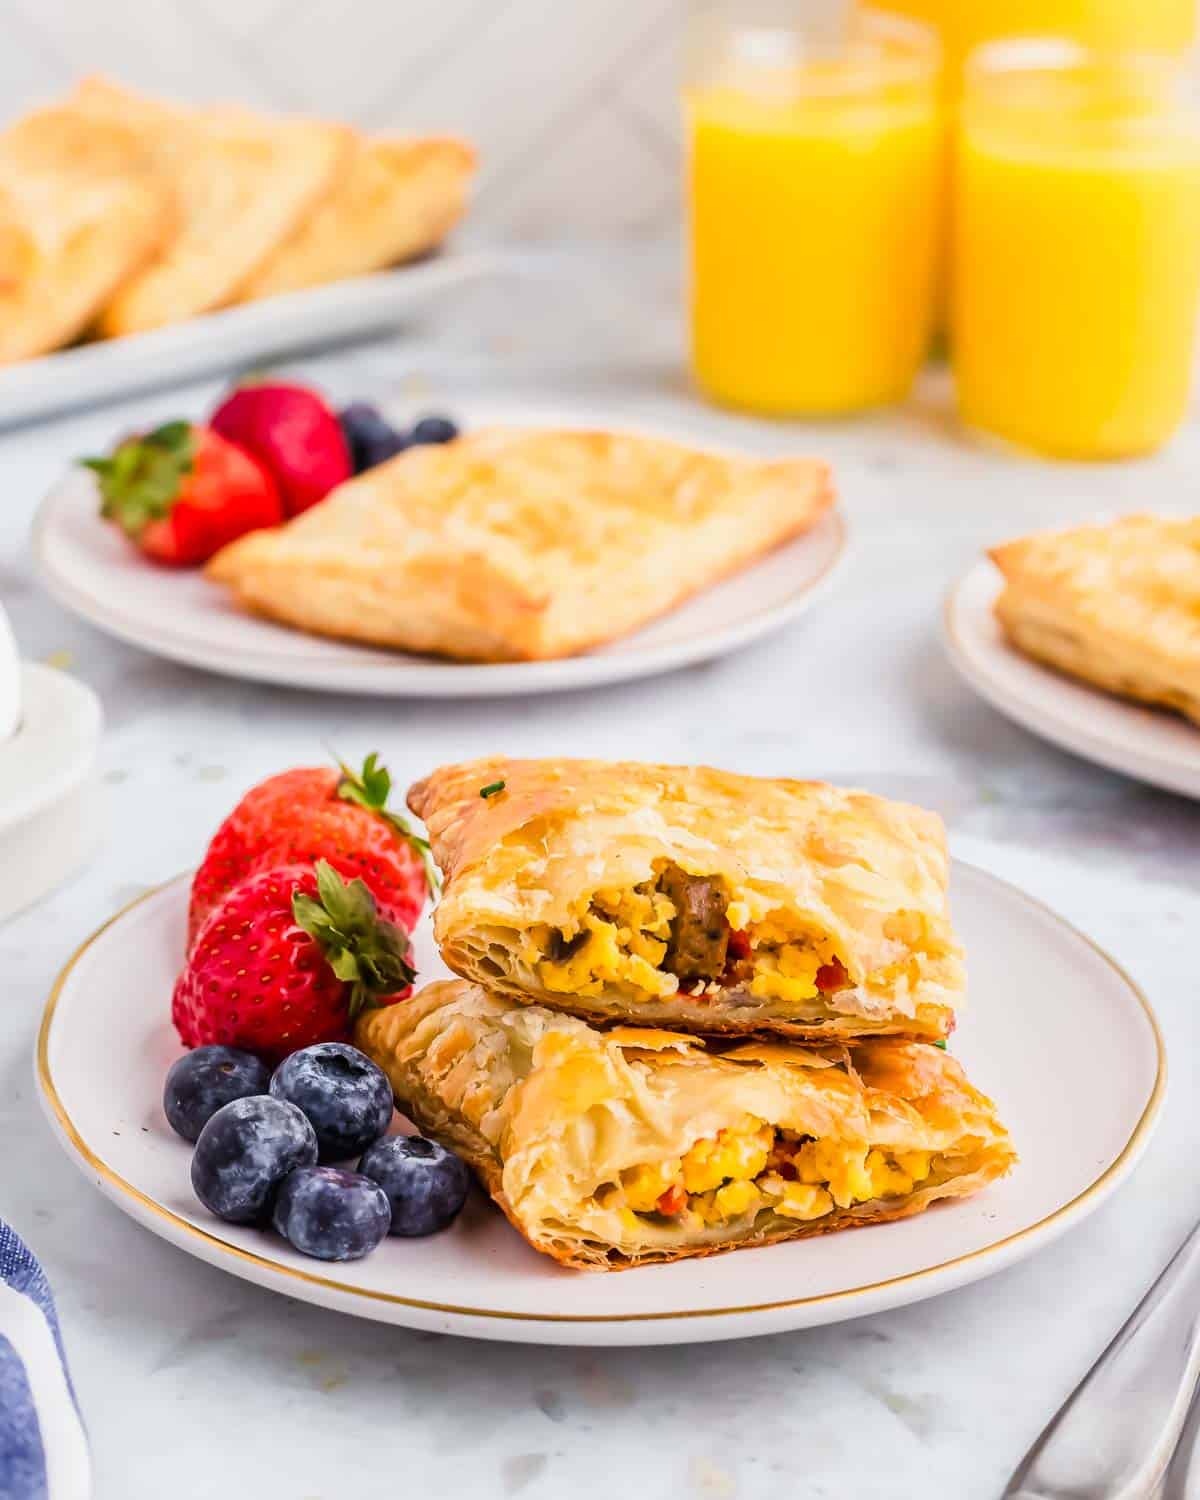 A stack of breakfast pastries on a plate with berries and orange juice.